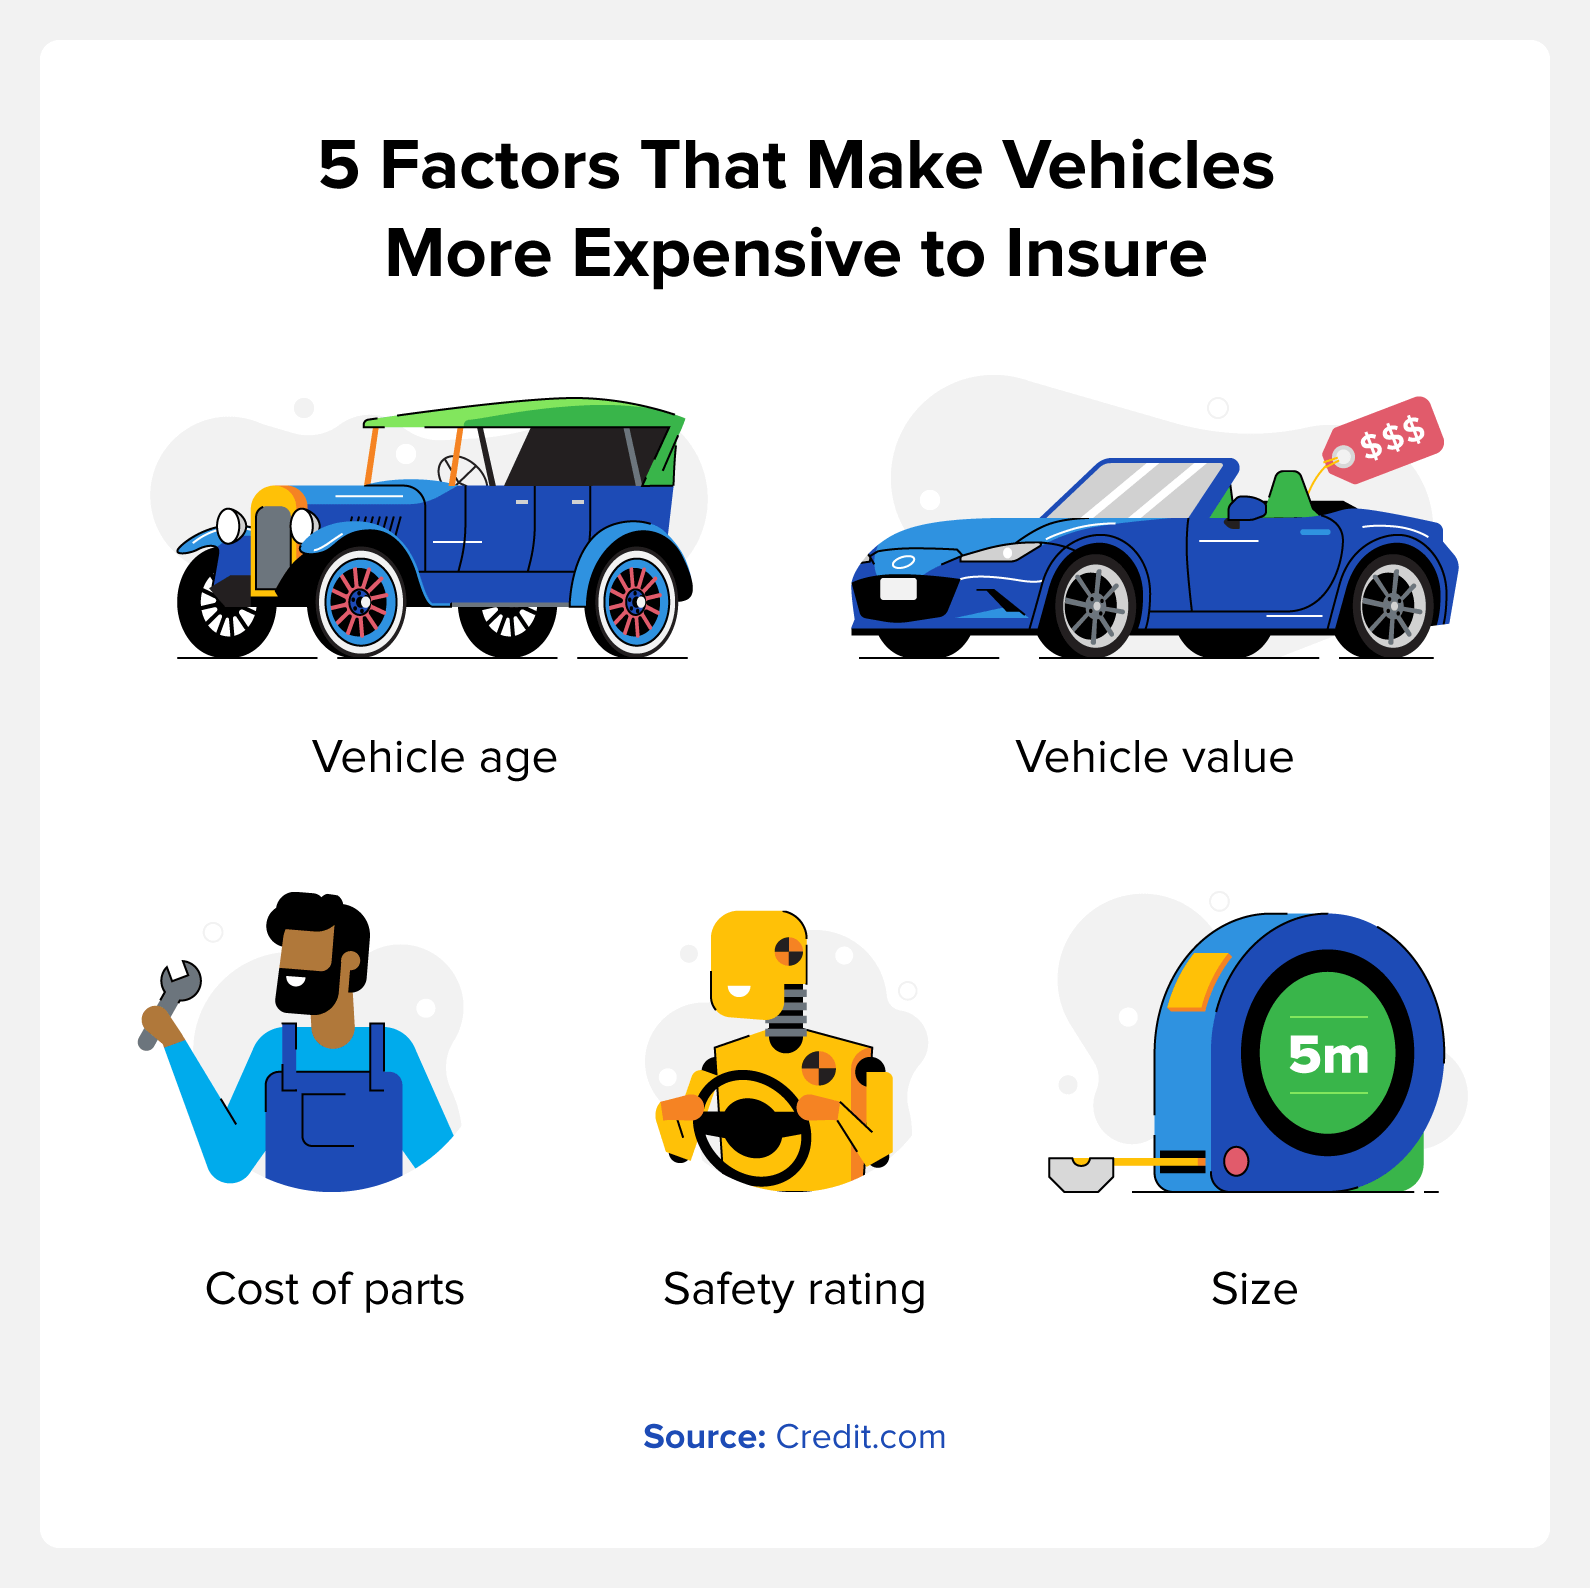 5 factors that make vehicles more expensive to insure